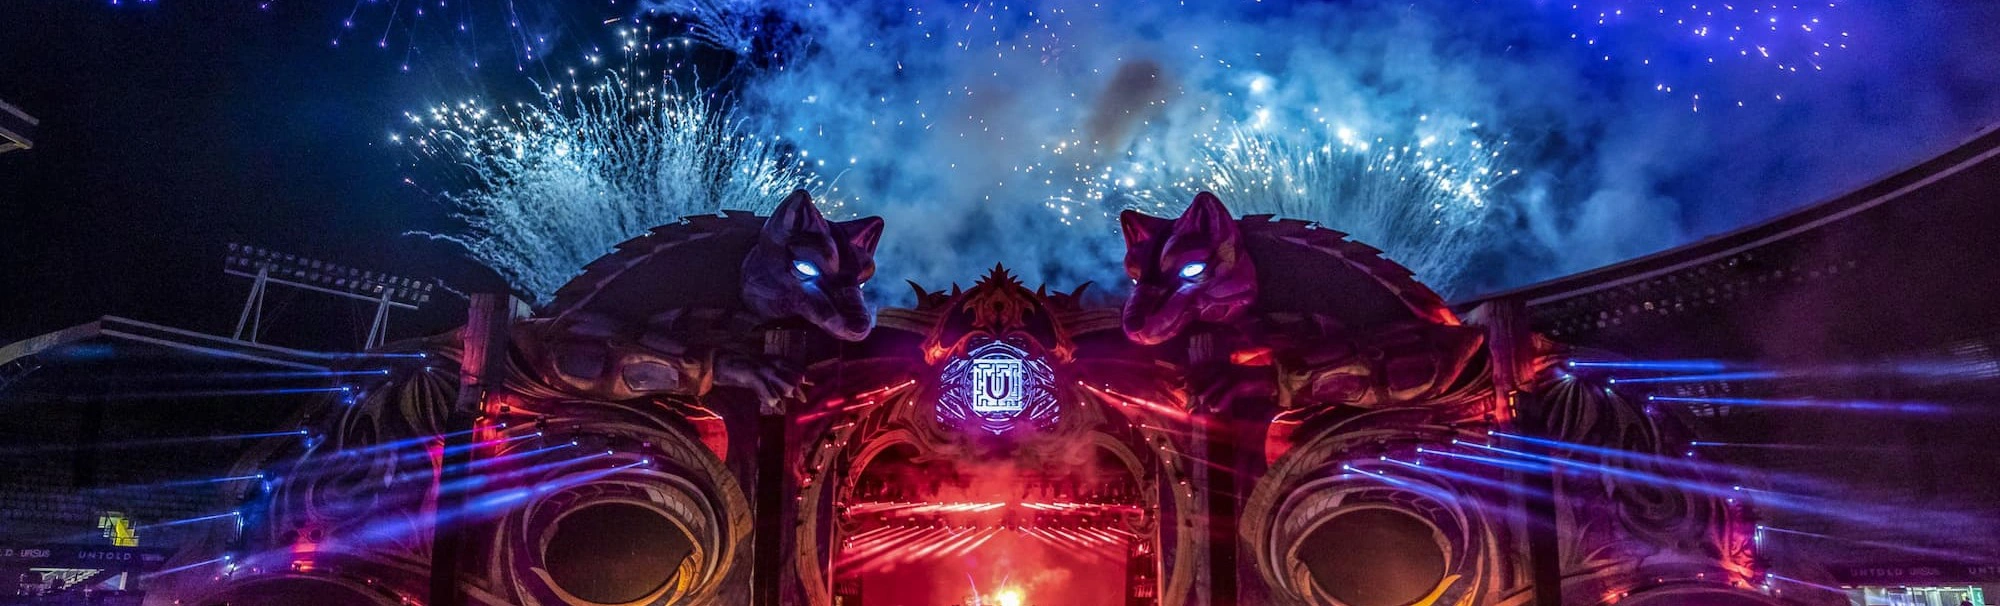 UNTOLD Festival in Dubai: the most exciting music festival in the Middle East!